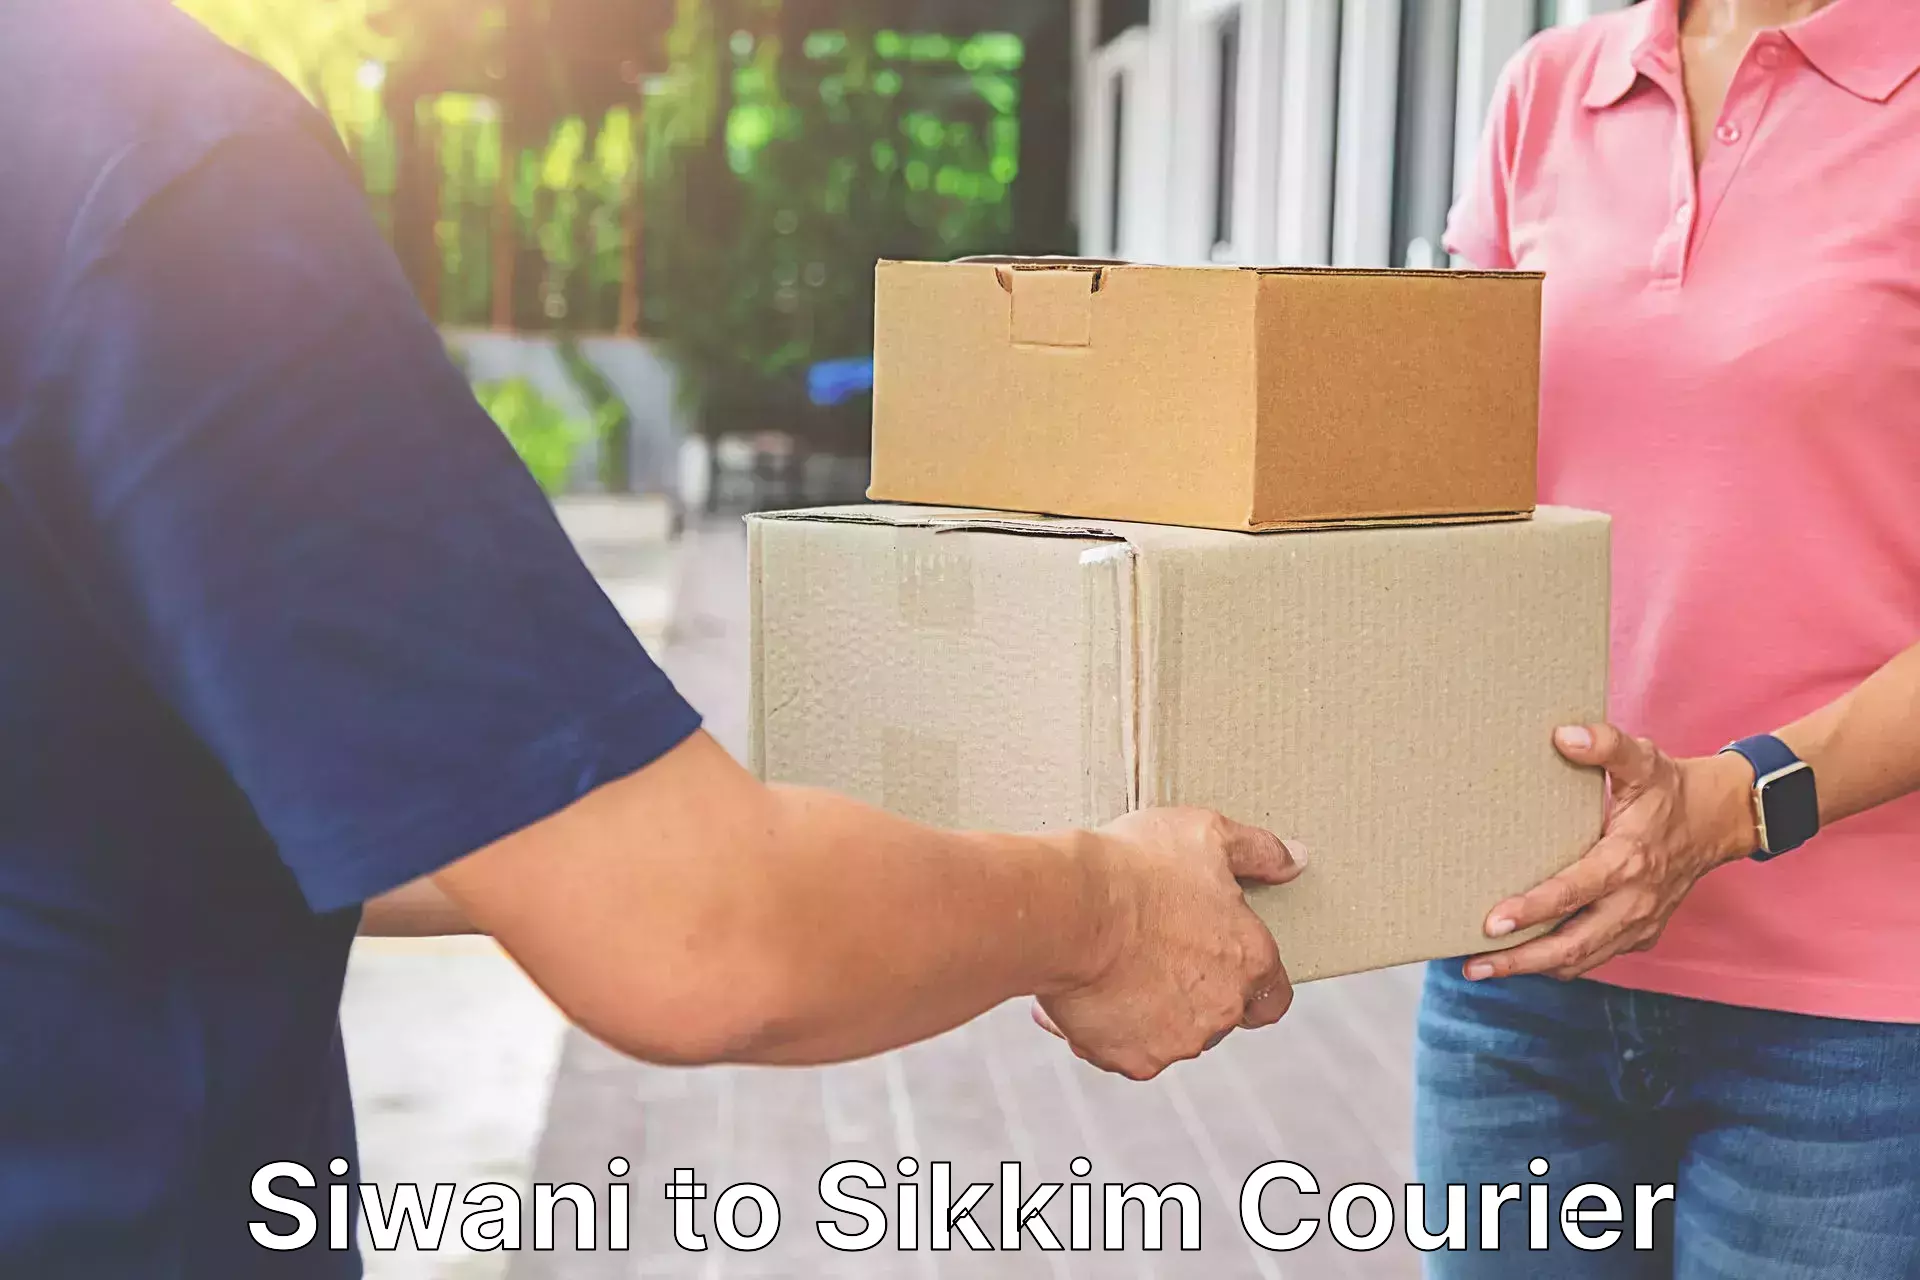 International courier networks Siwani to Pelling